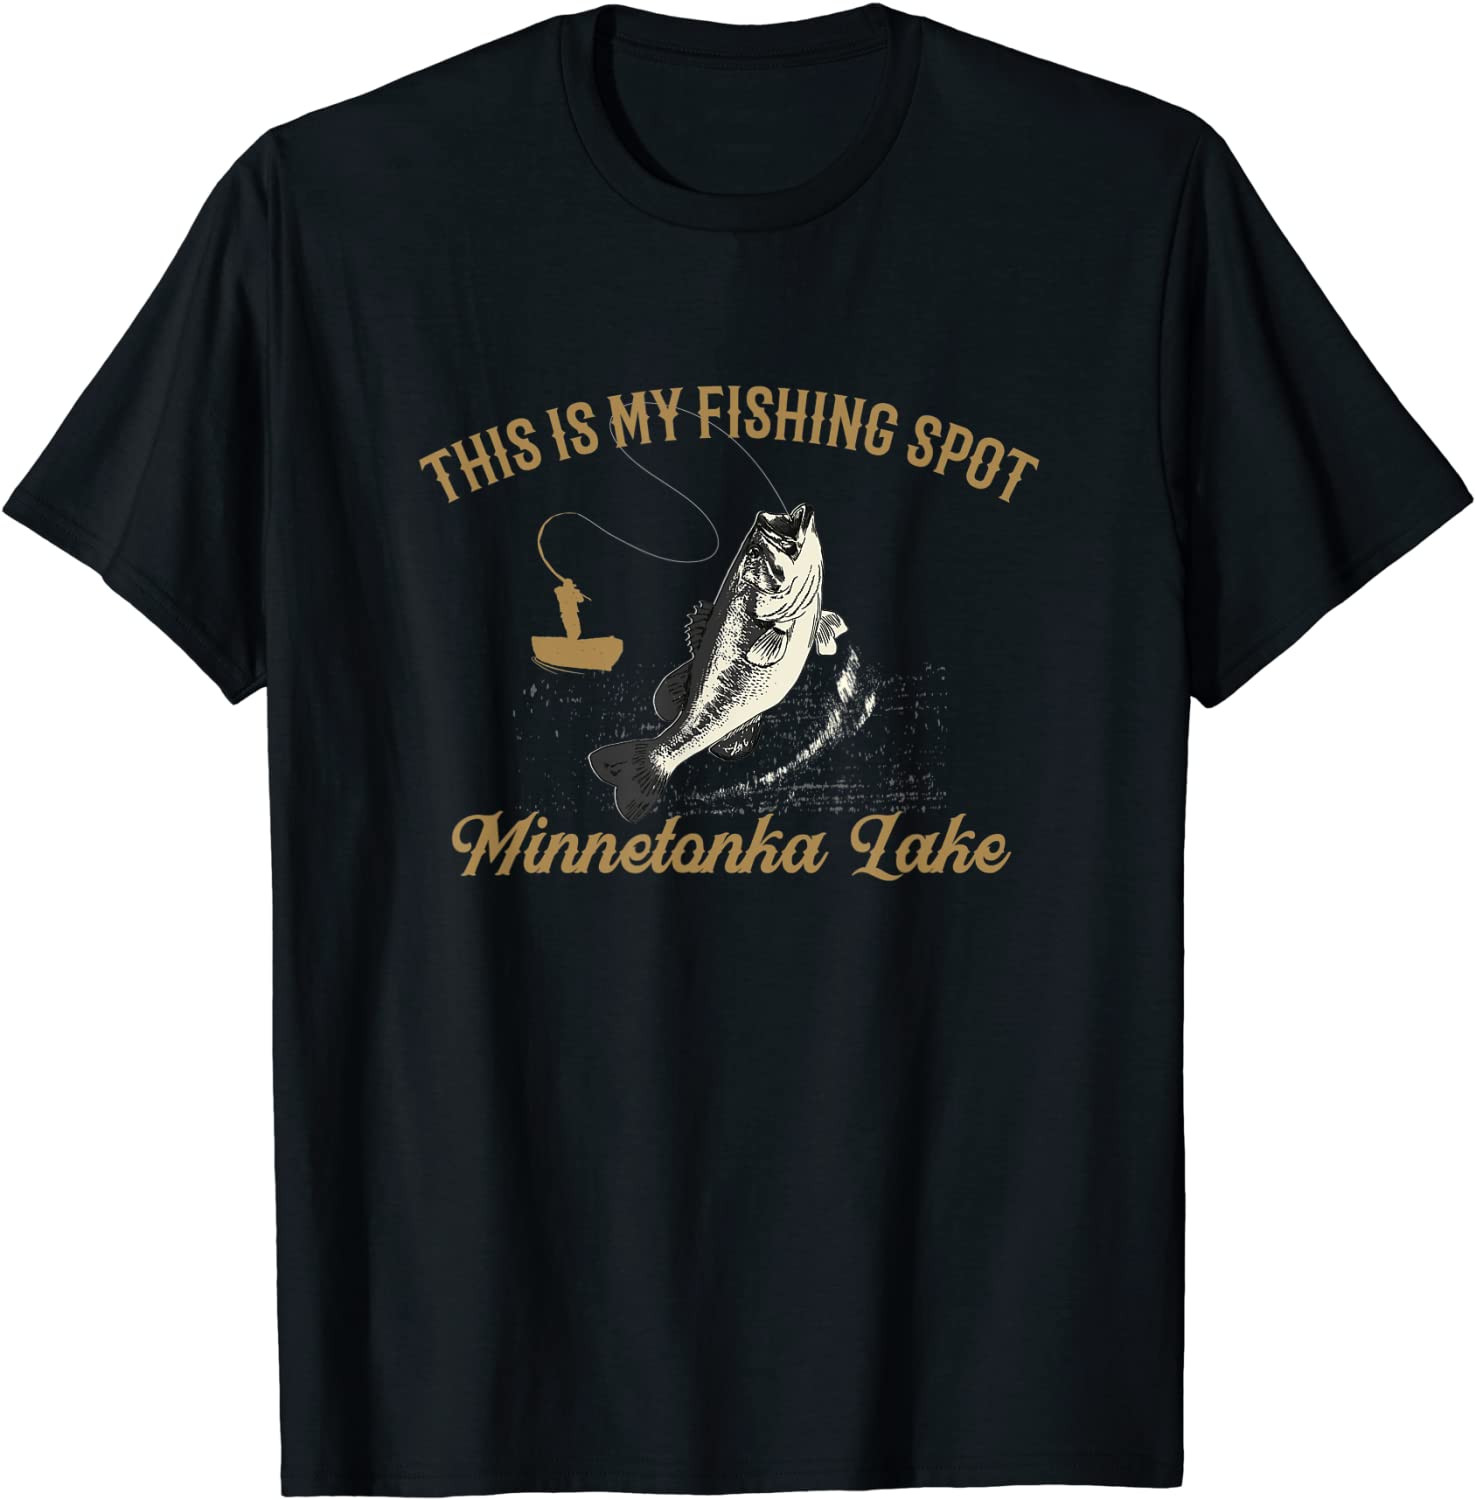 Beer And Fishing Is My Kind Of Thing Minnetonka Lake T-Shirt